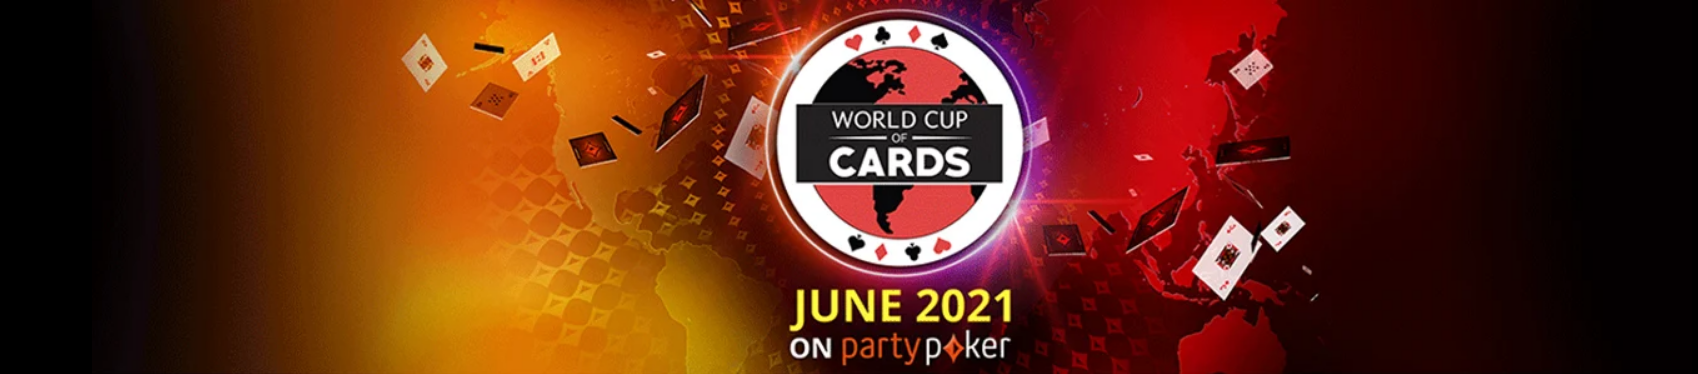 The World Cup of Cards is online, only at partypoker!